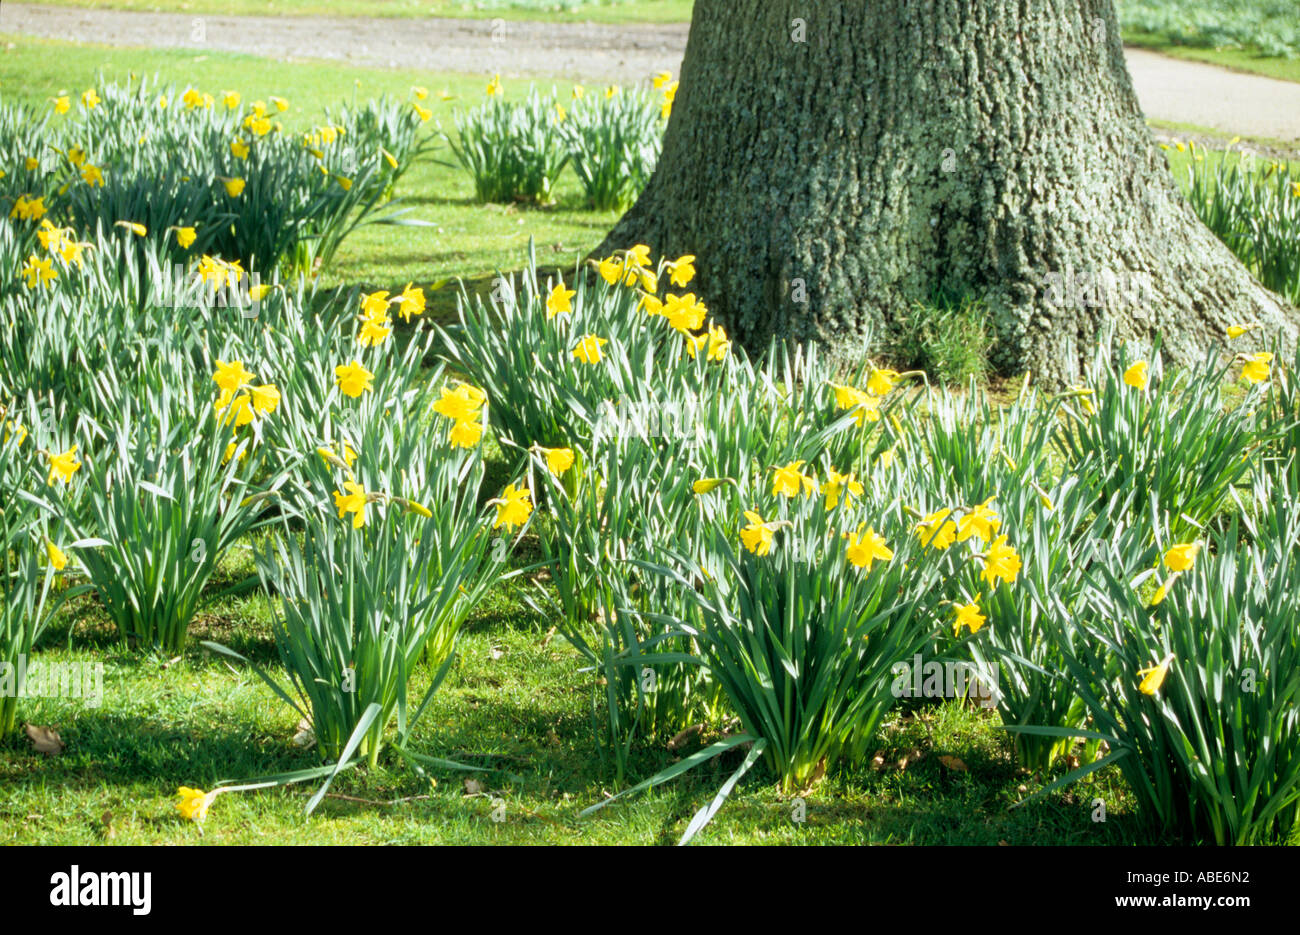 Spring yellow daffodils flower around an oak tree in a garden Stock Photo